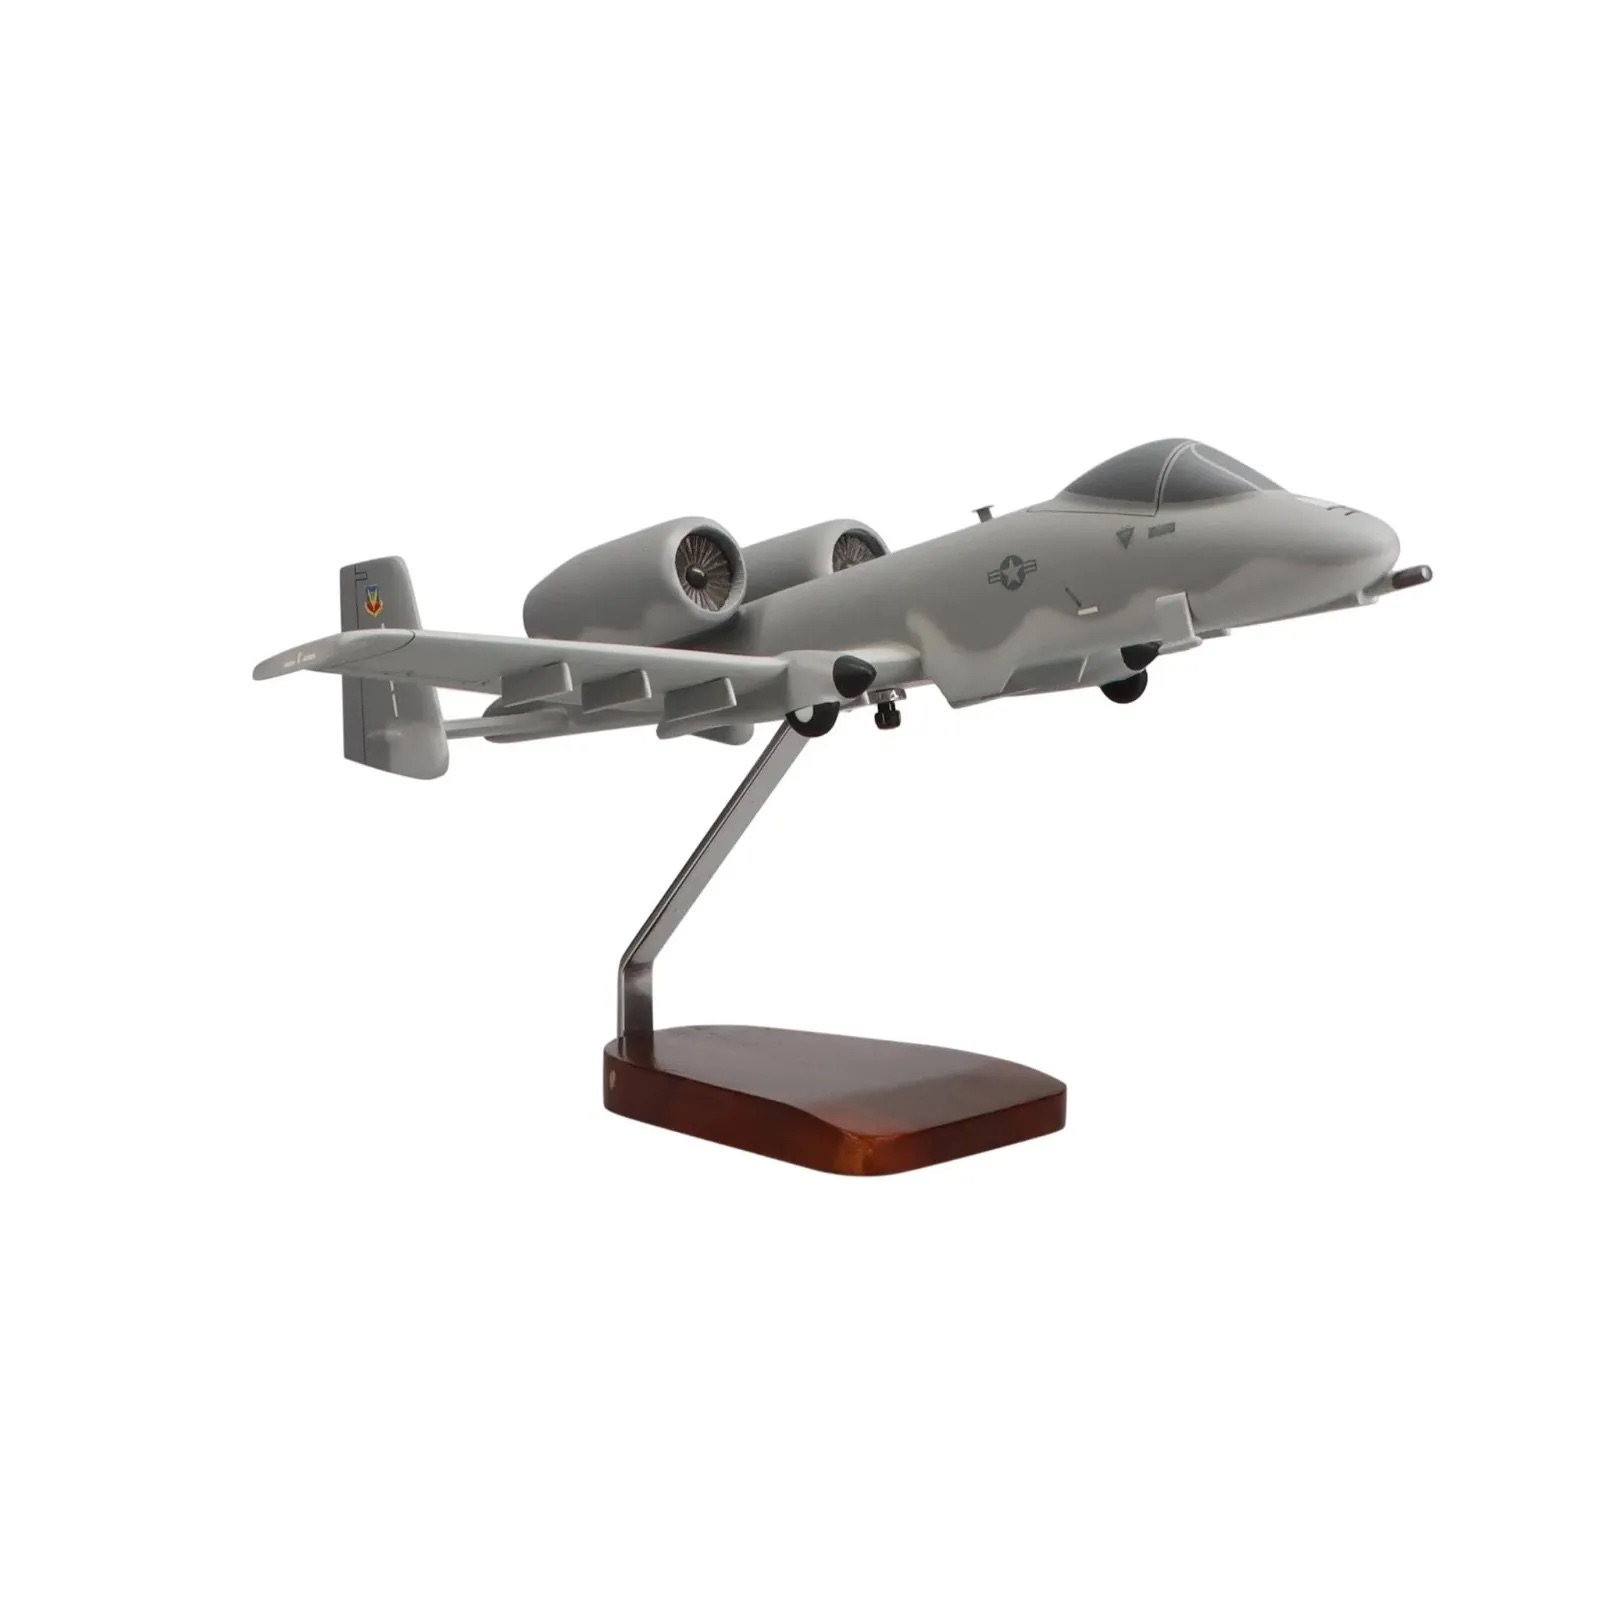 A10 Warthog Scale Model - Image 4 of 4